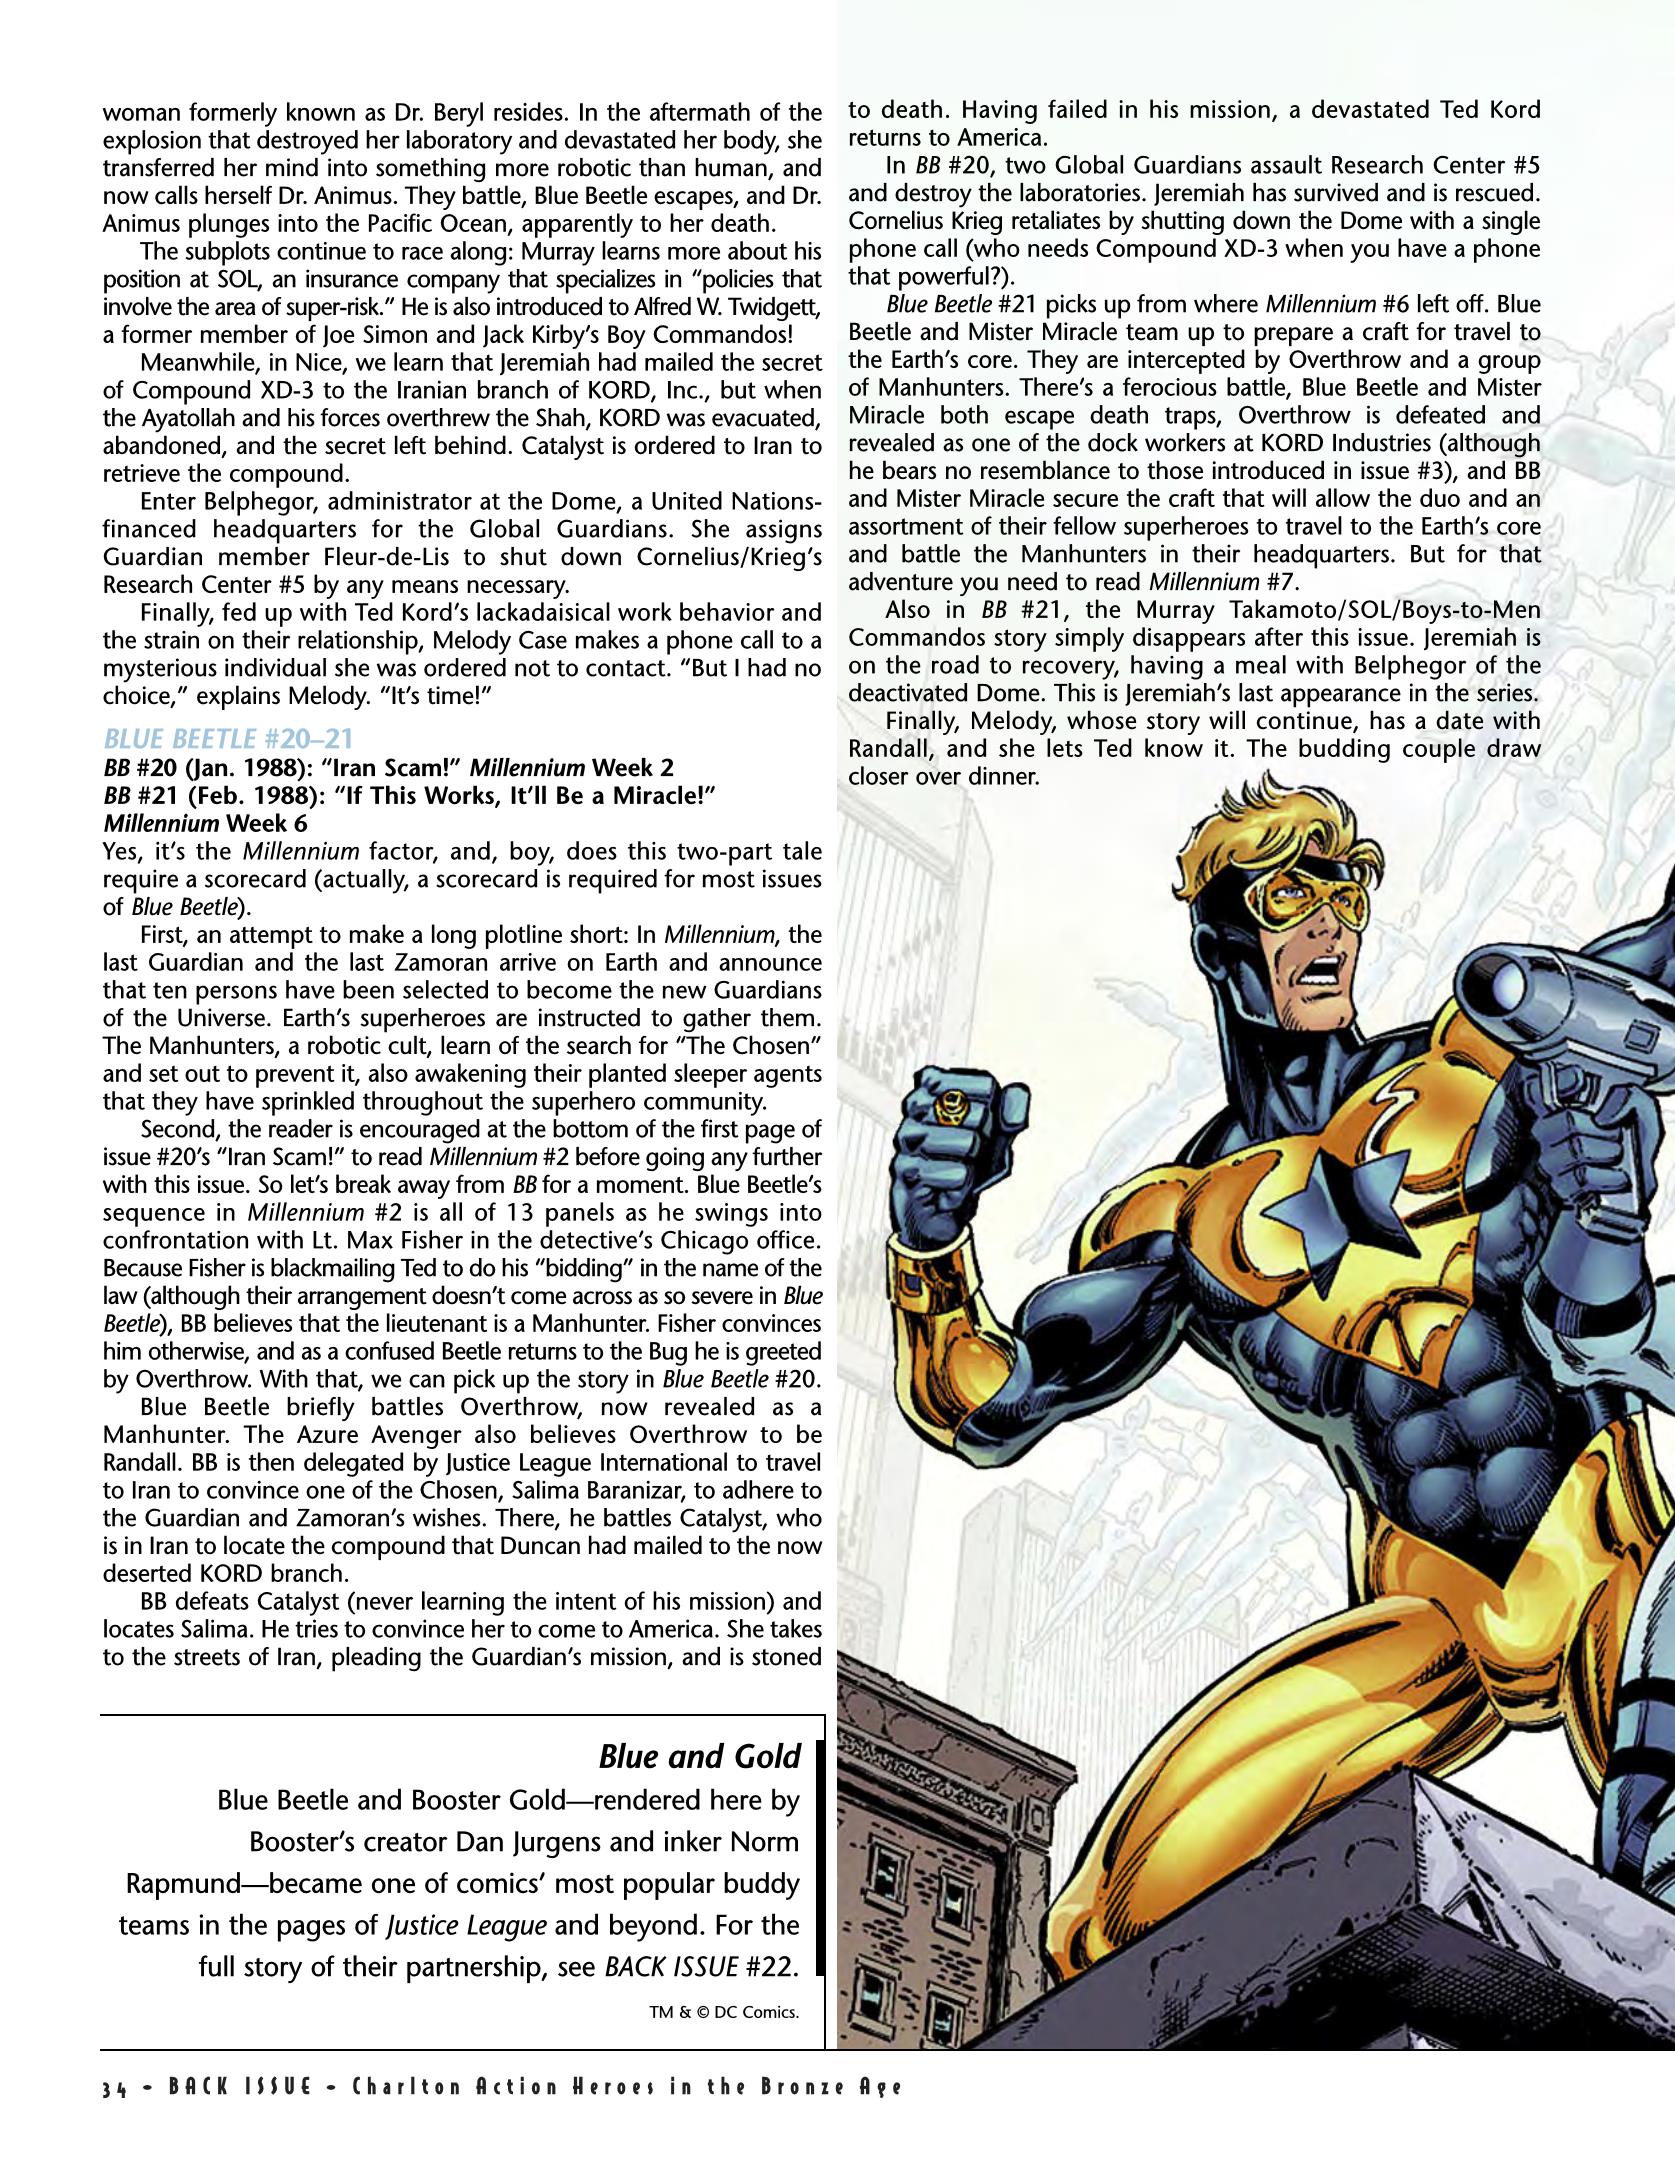 Read online Back Issue comic -  Issue #79 - 36